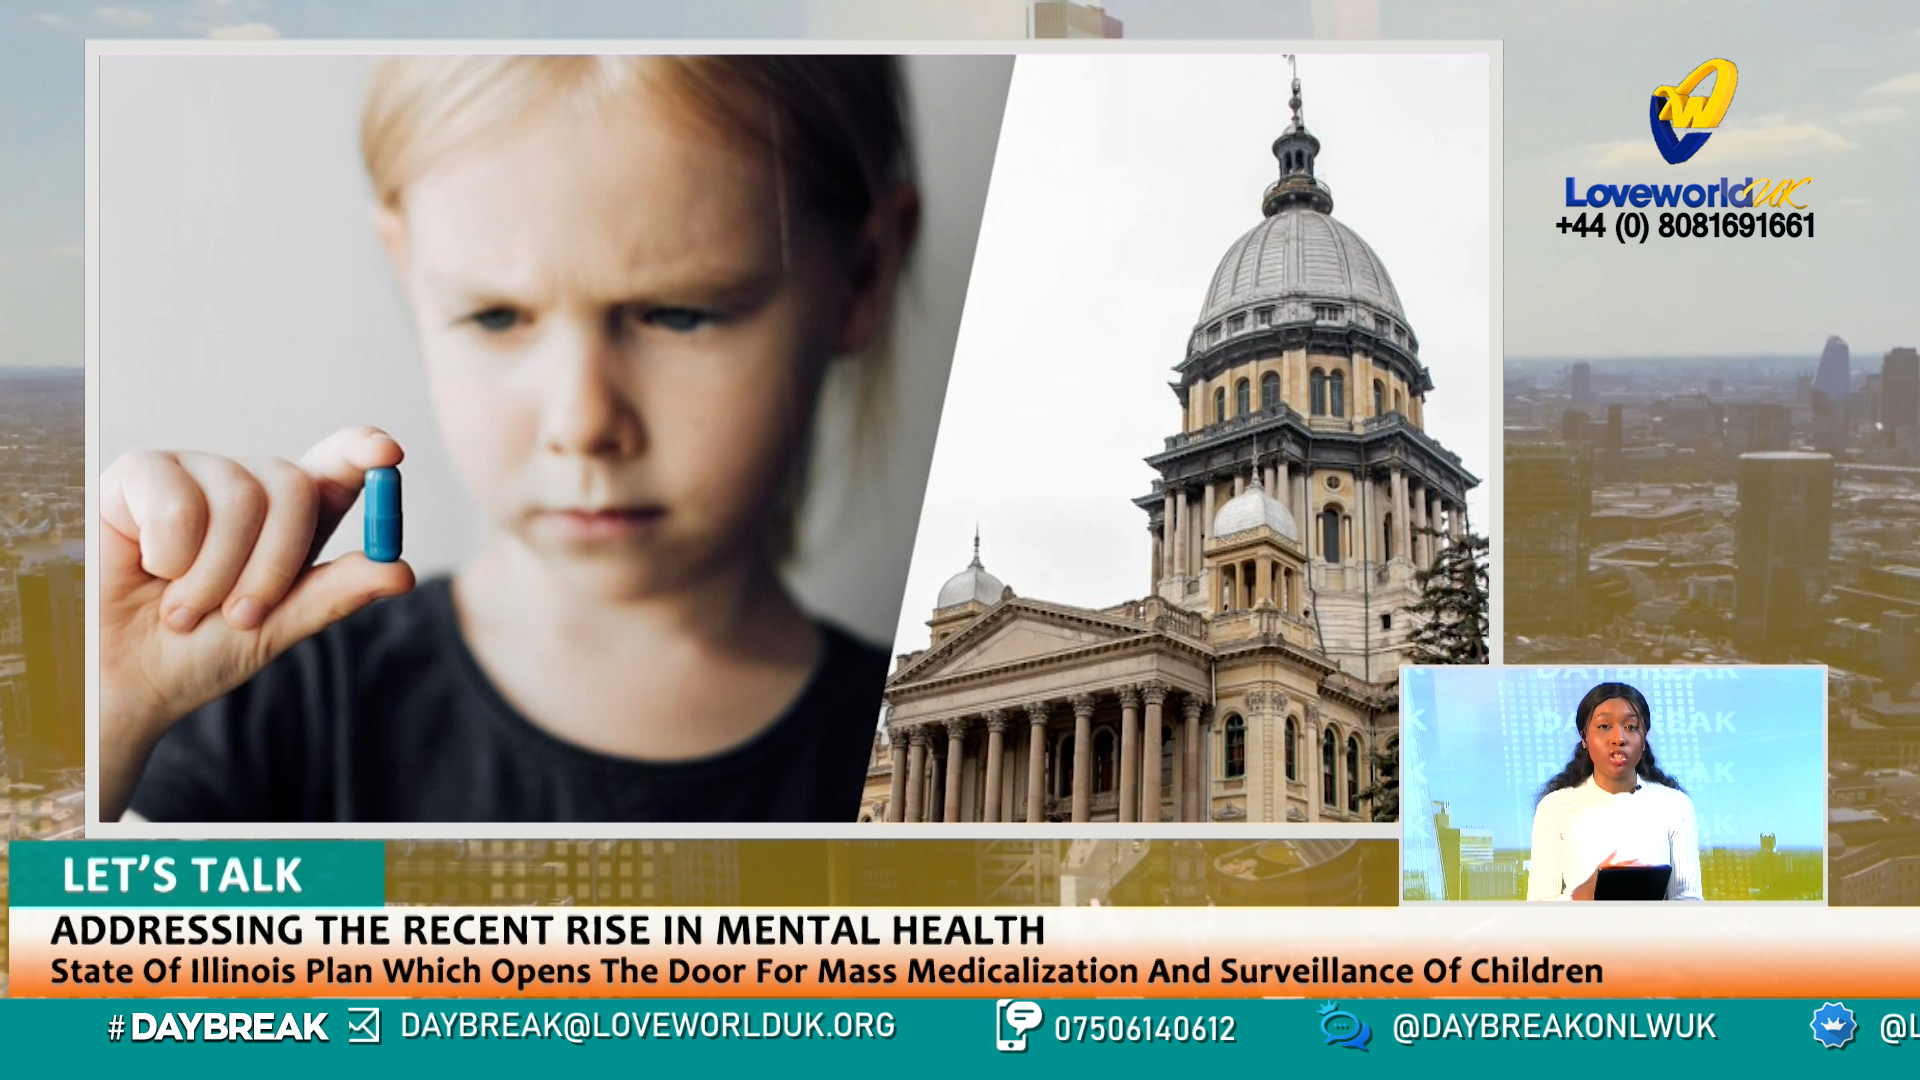 EP 19 - ADDRESSING THE RECENT RISE IN MENTAL HEALTH - State Of Illinois Plan Which Opens The Door For Mass Medicalization And Surveillance Of Children